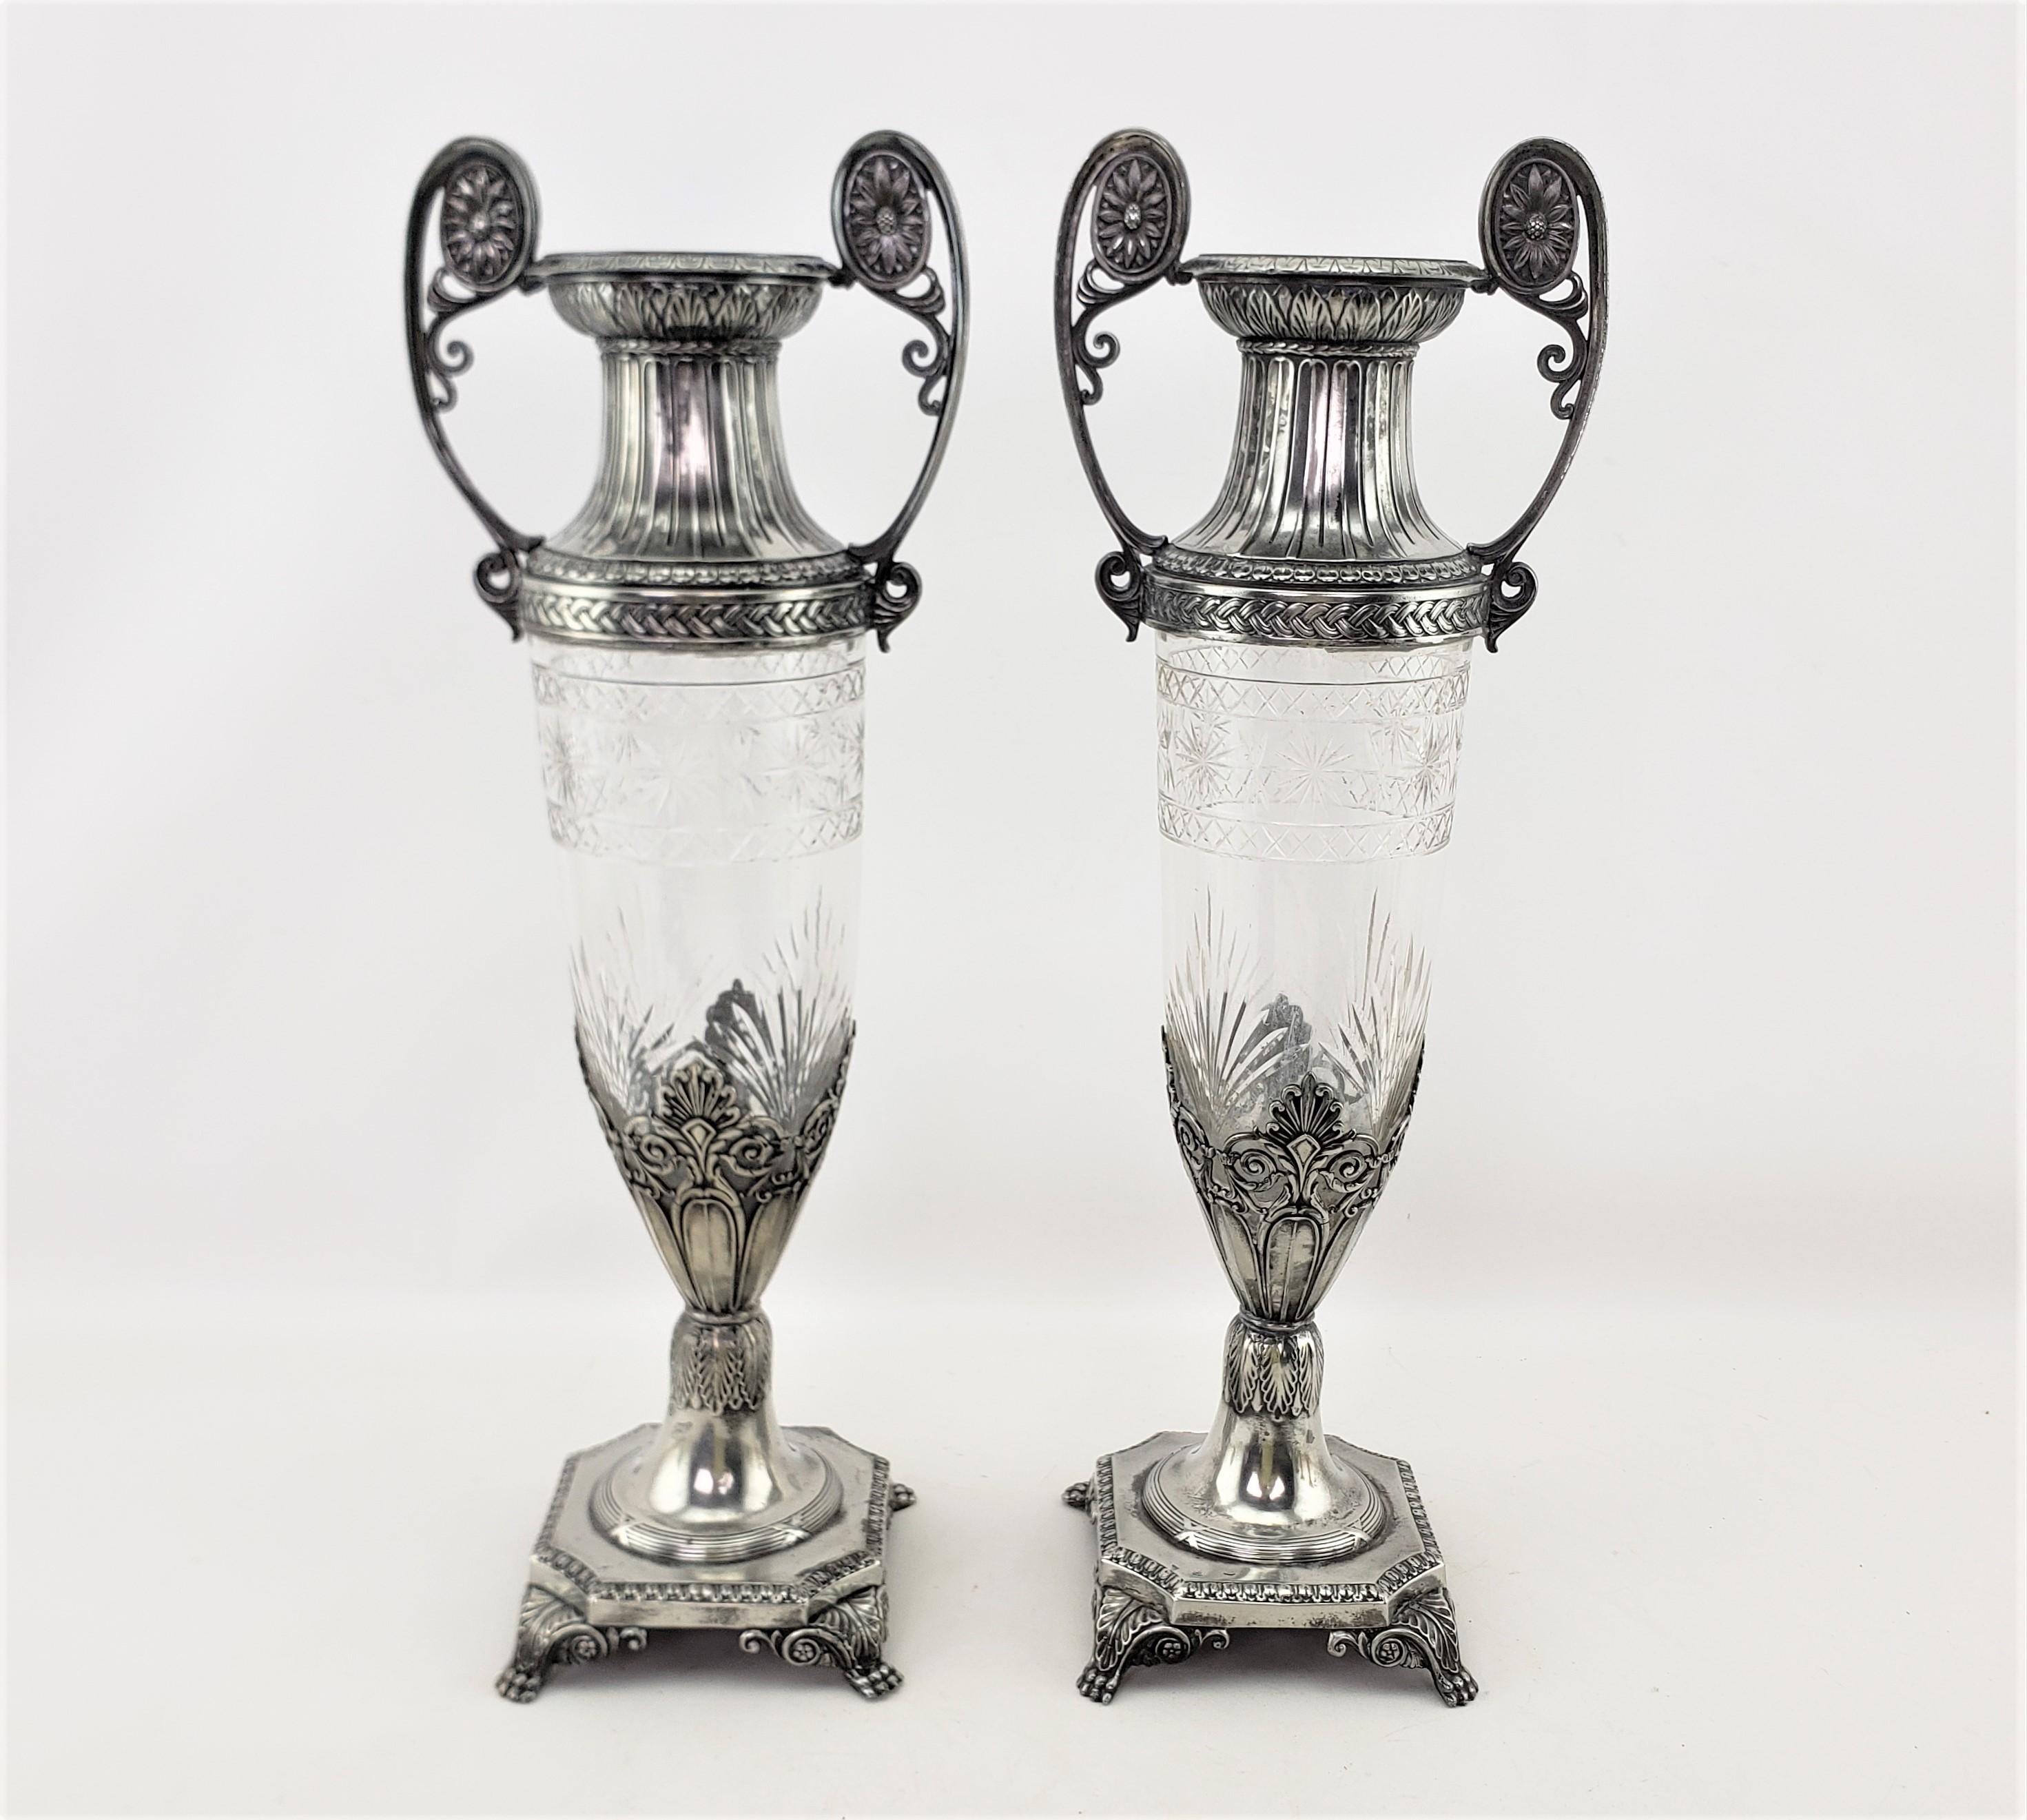 This pair of antique vases were made by the well known WMF company of Germany in approximately 1900 and done in a Seccessionist style. The vases are done with a tapered and cut crystal body with ornate silver plated mounts composing the top, handles